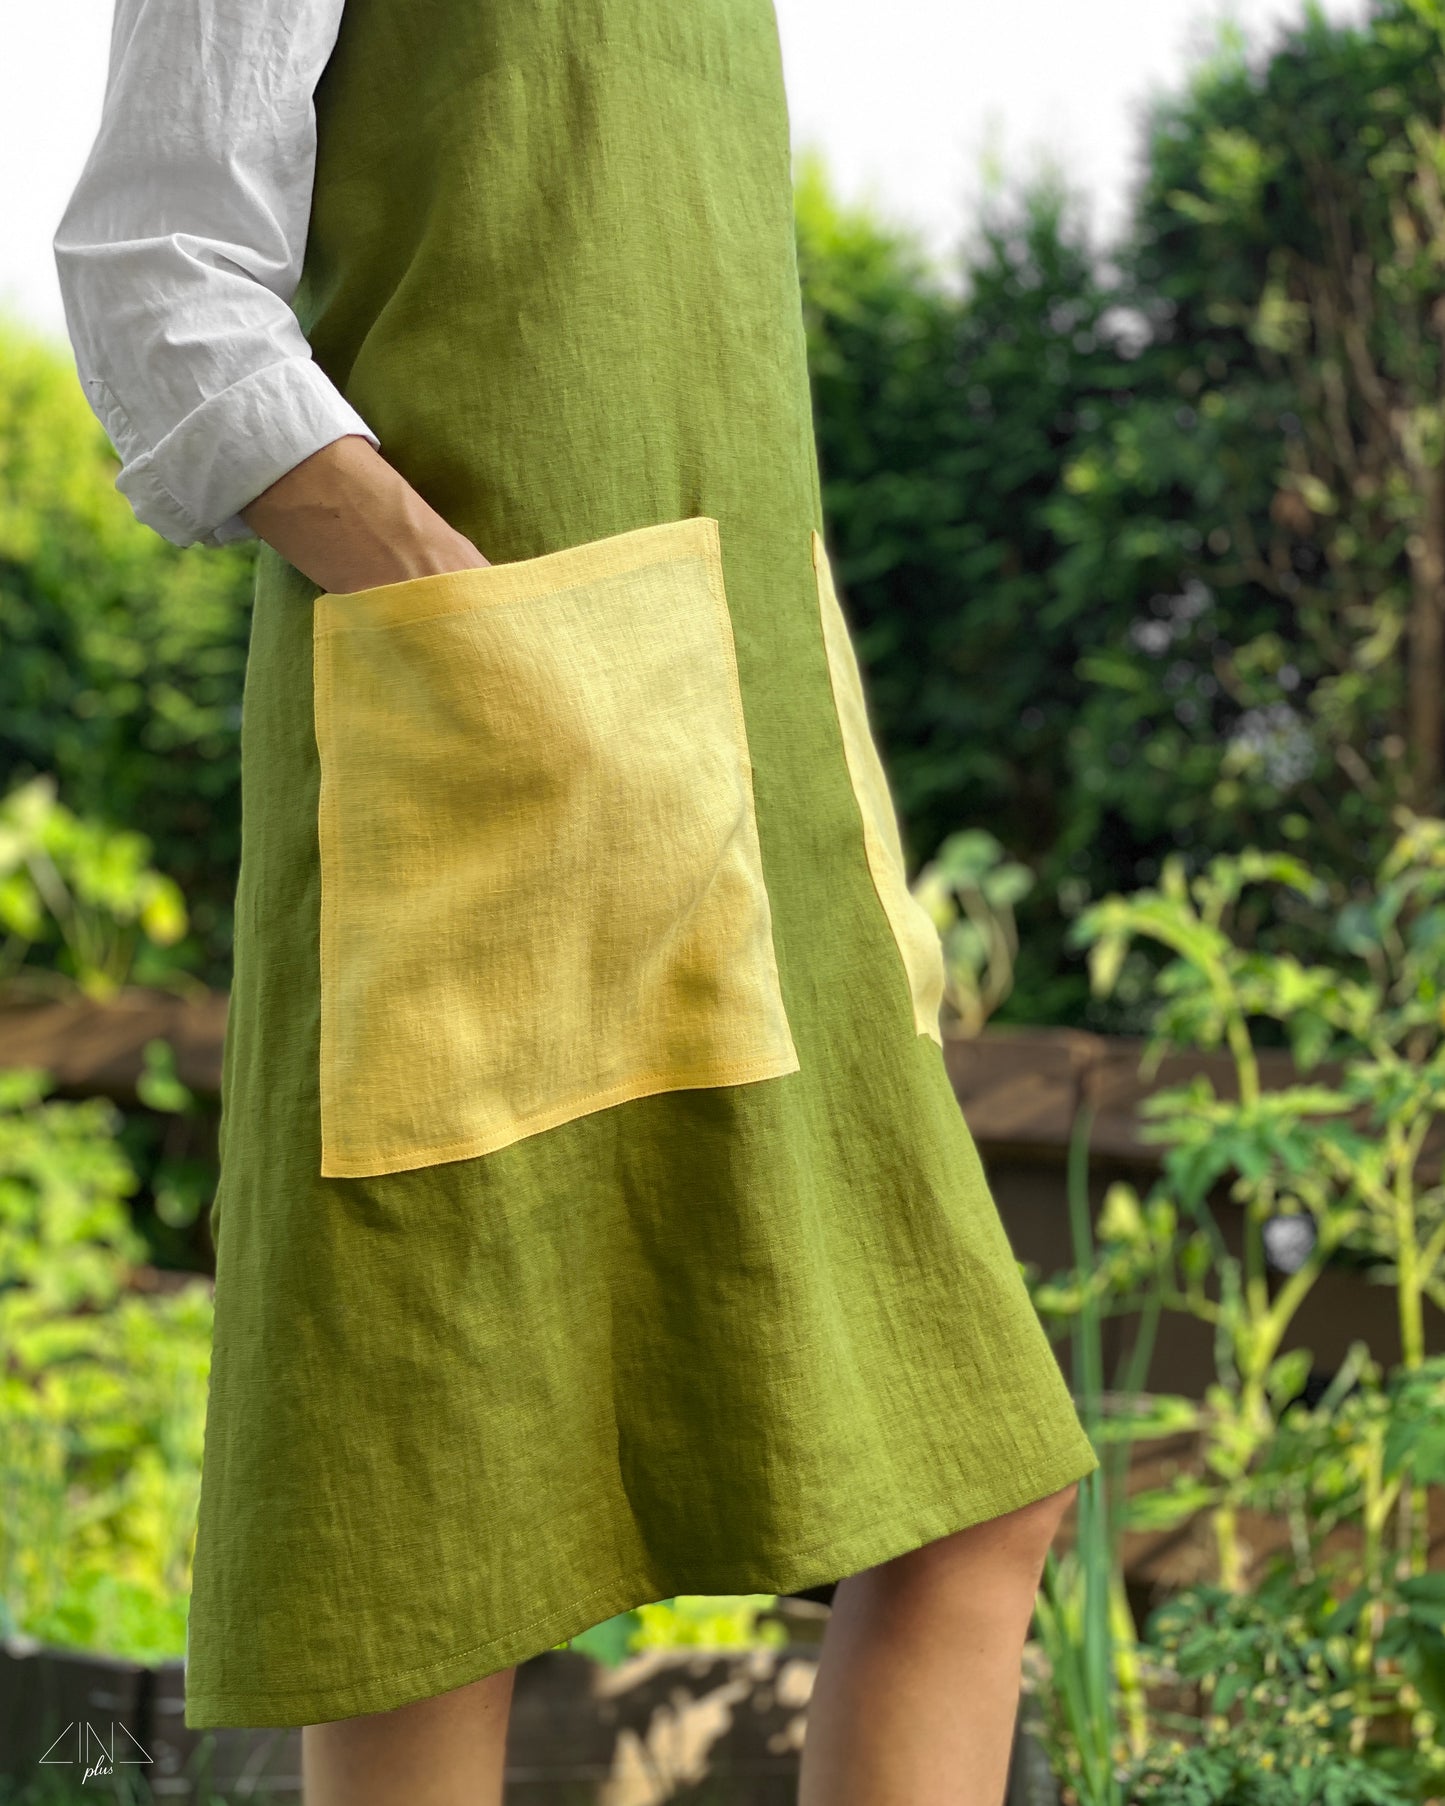 Bicolor Linen Pinafore Apron in Moss Green with Yellow Pockets and Straps for gardening.